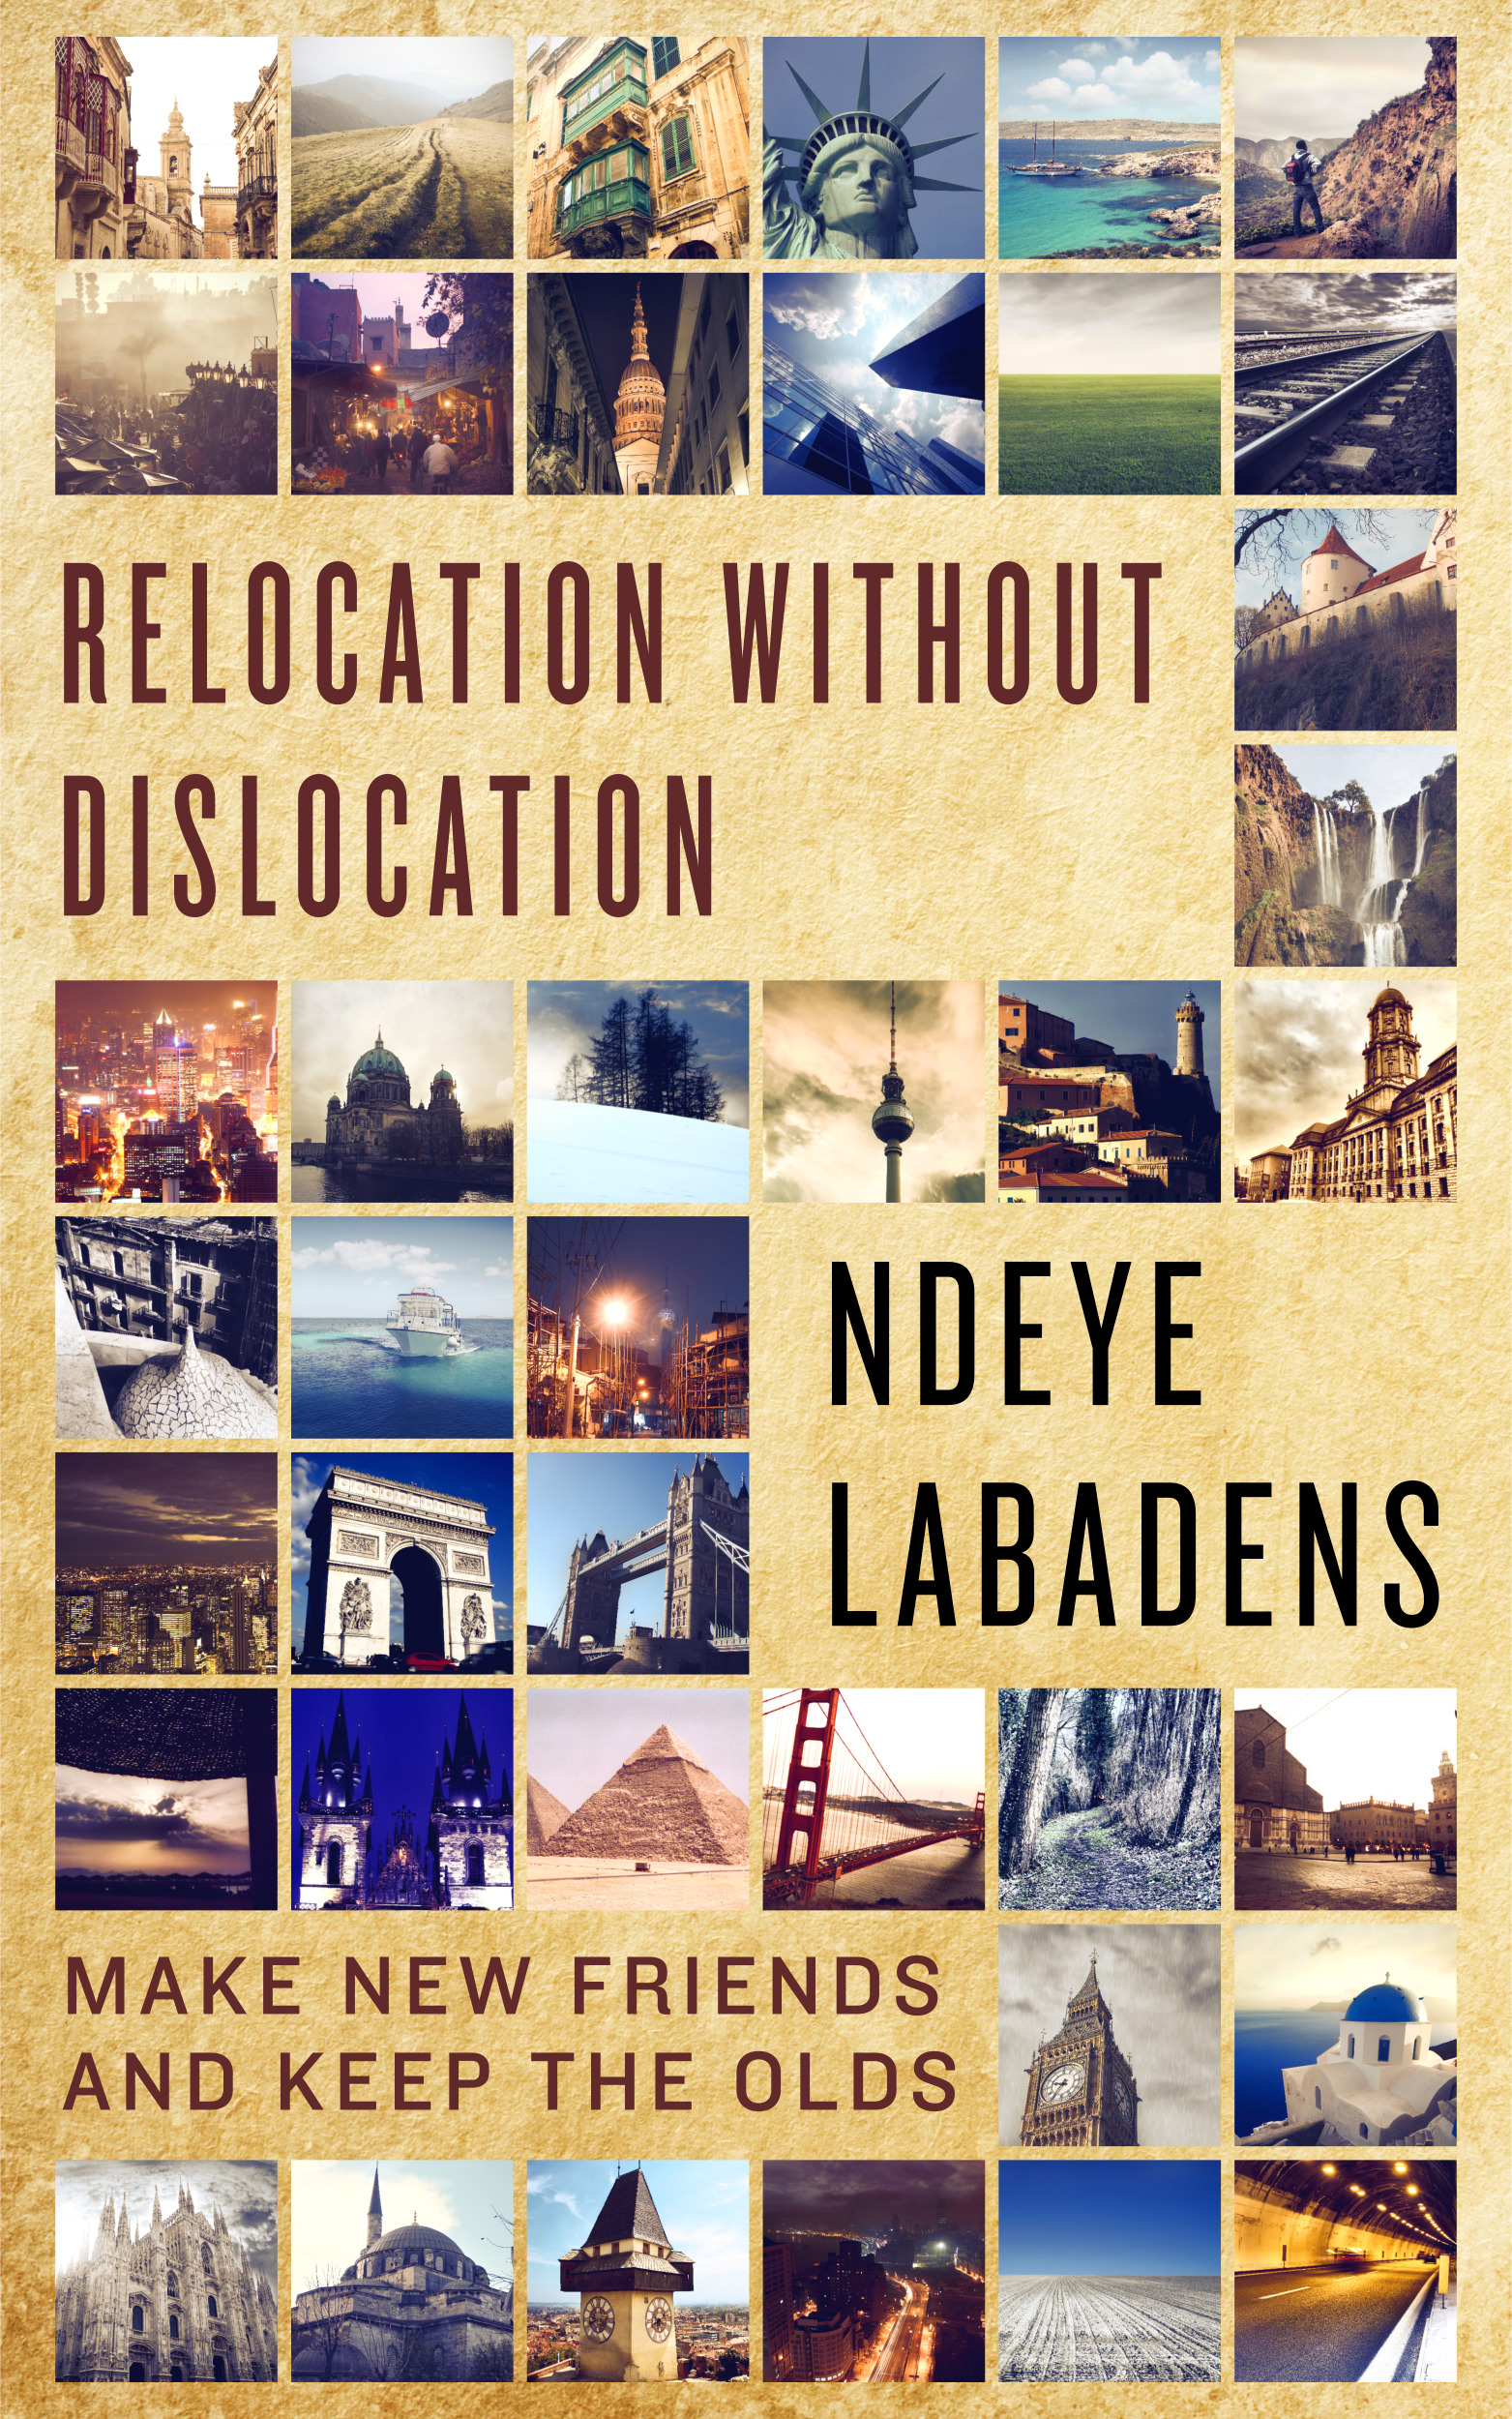 FREE: Relocation Without Dislocation: Make New Friends And keep the Old (Travels and Adventures of Ndeye Labadens Book 2) by Ndeye Labadens